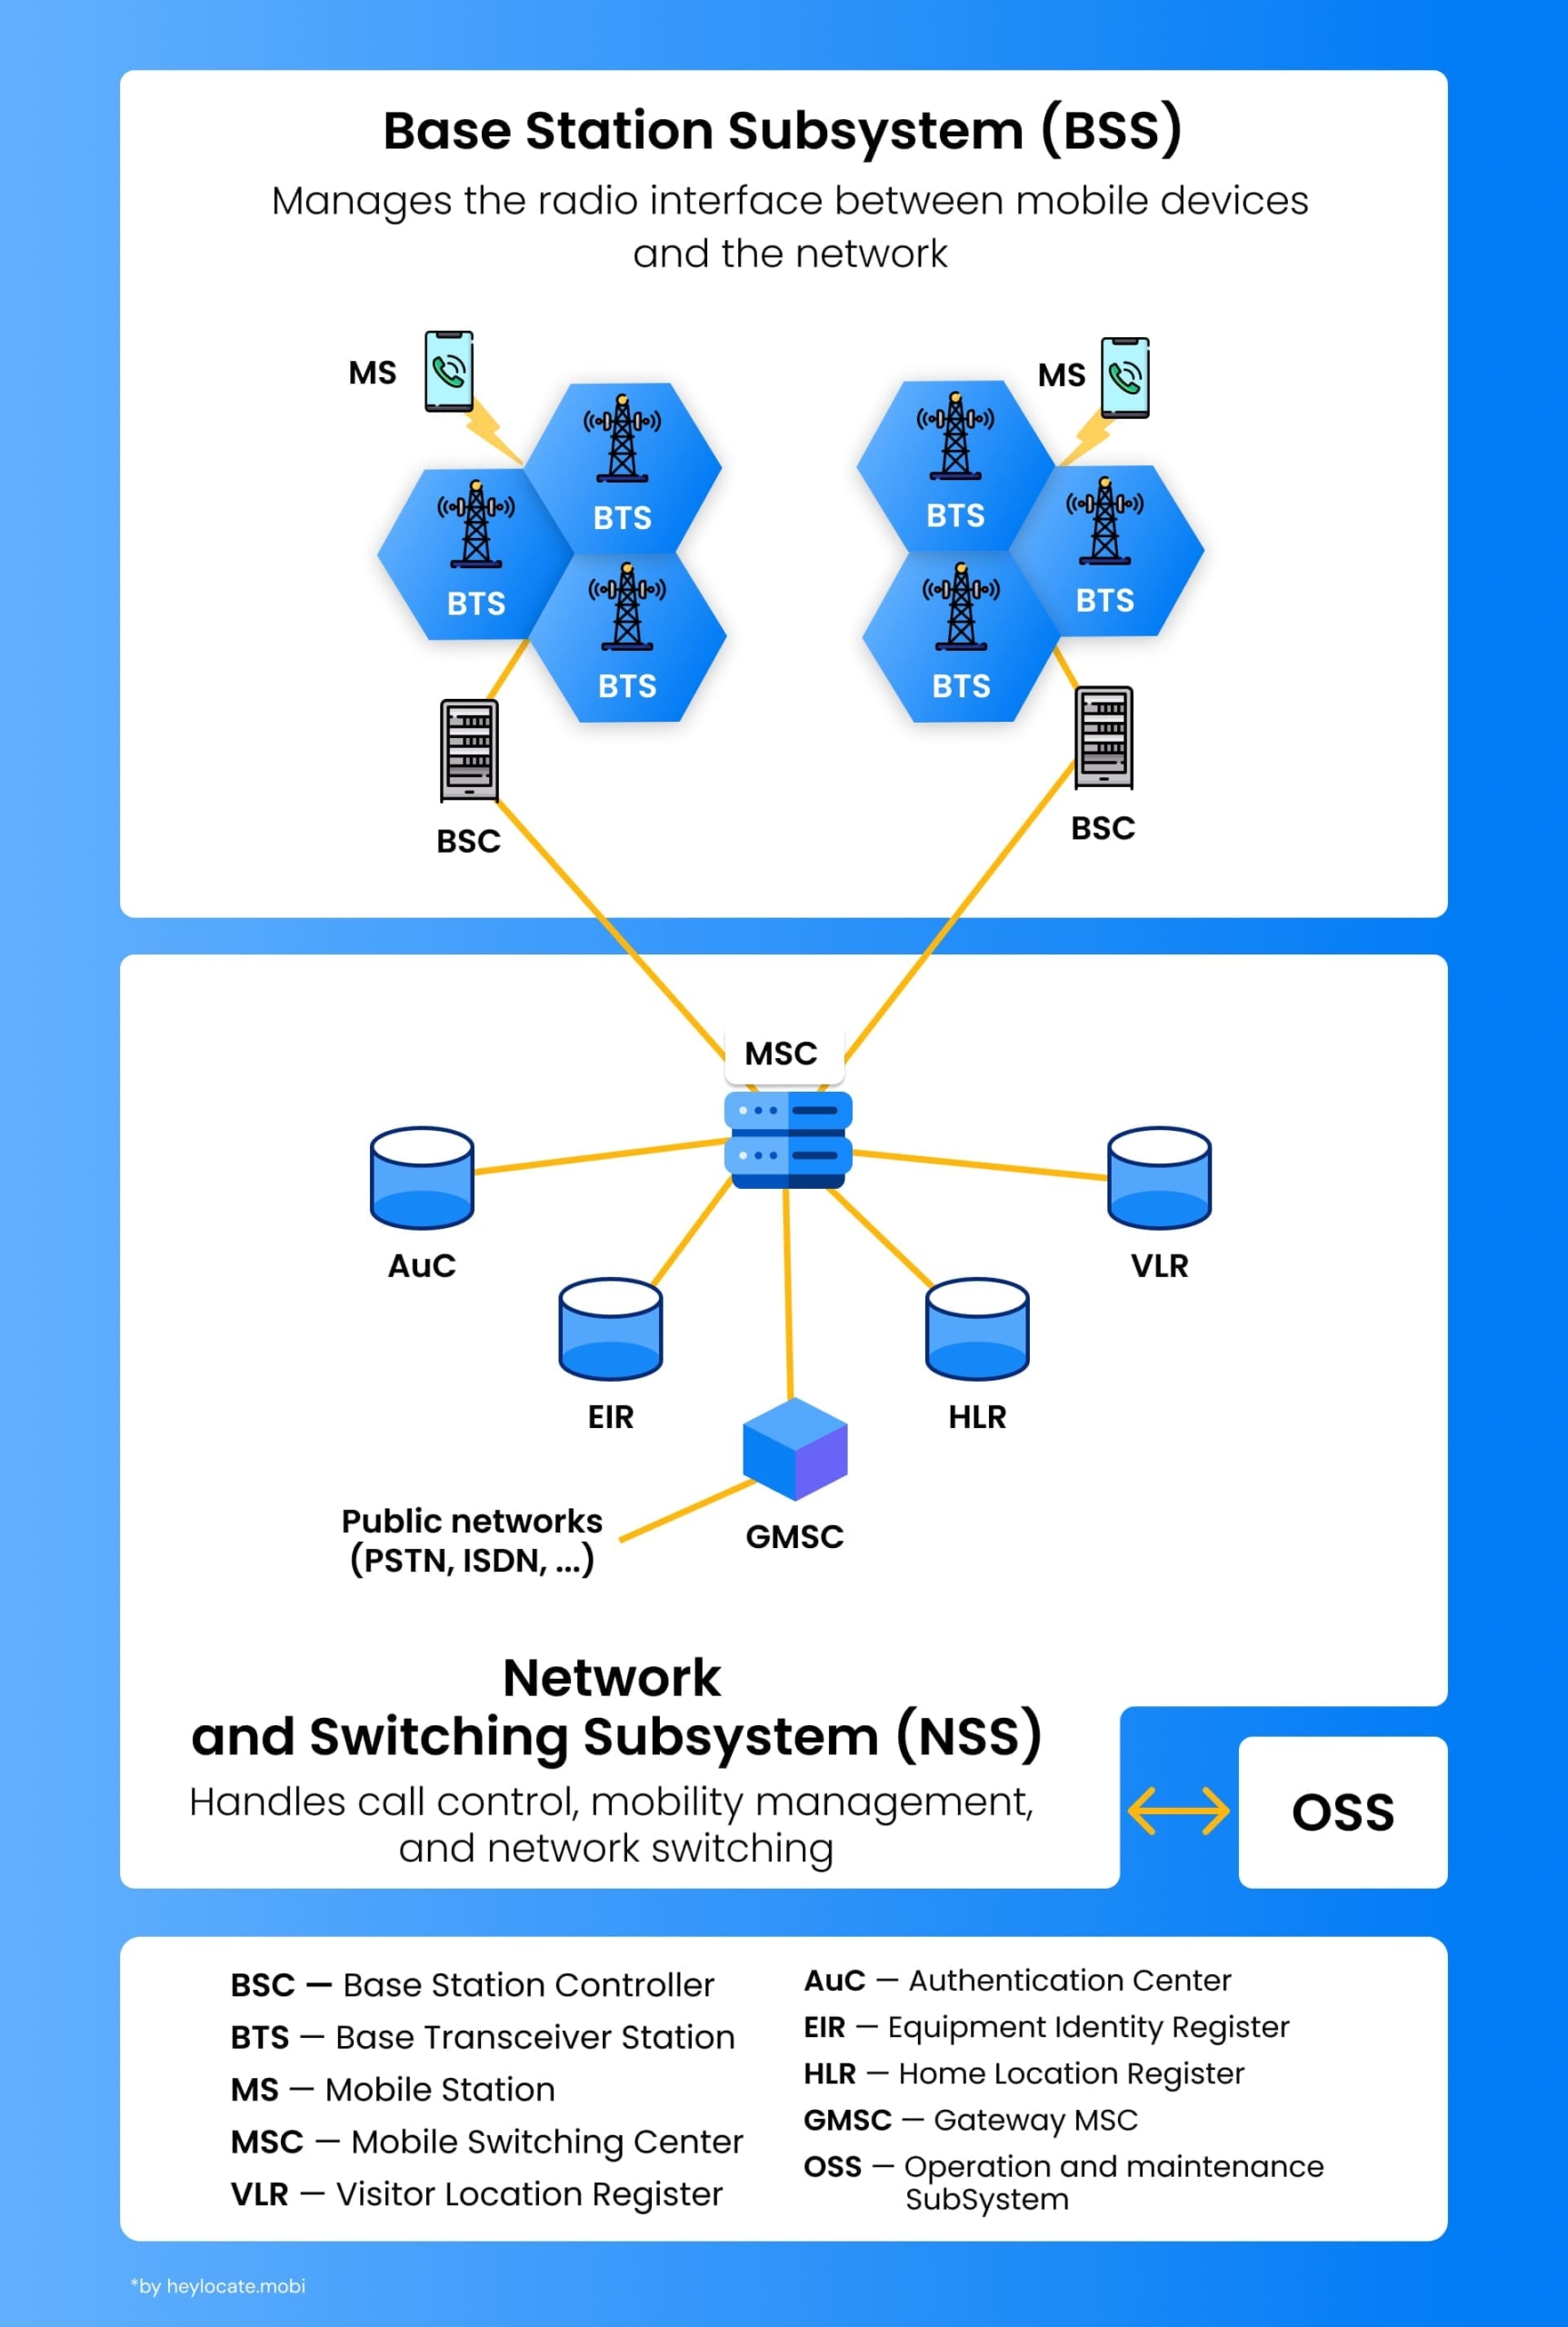 An informative diagram showing the structure of a GSM network, including the Base Station Subsystem (BSS) and Switching Subsystem (NSS)